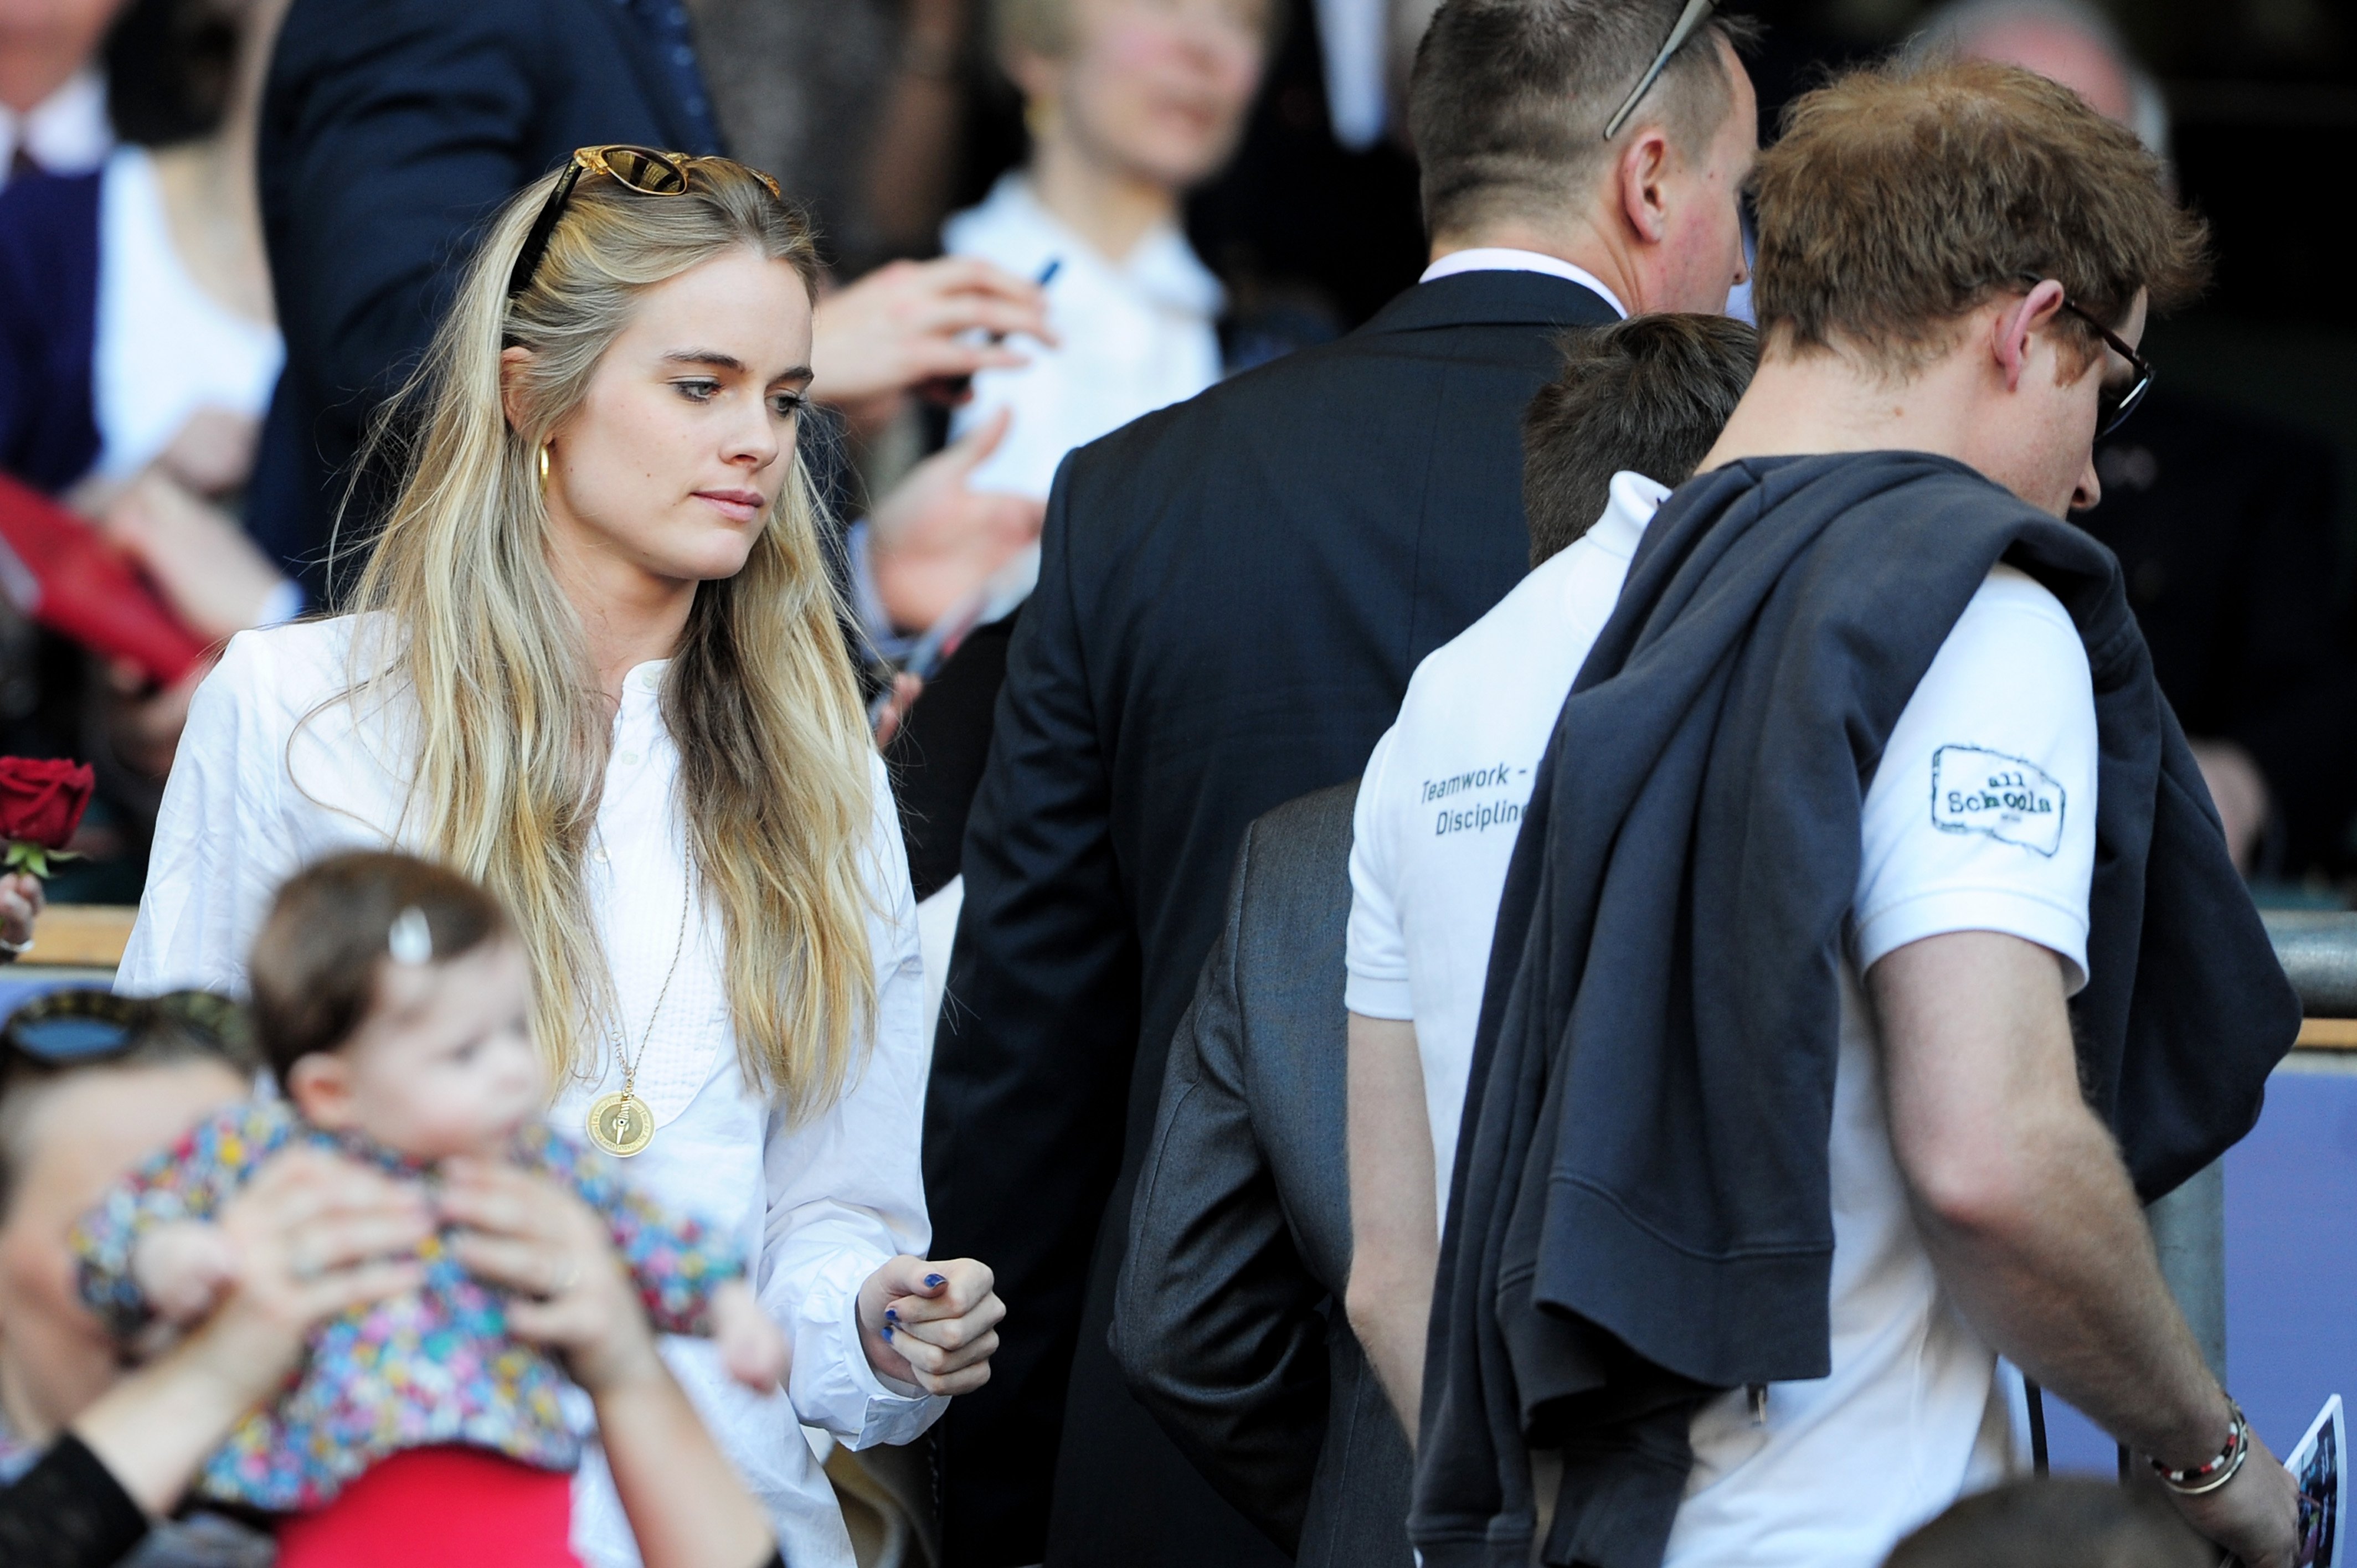 Prince Harry and Cressida Bonas about to take their seats during the RBS Six Nations match between England and Wales on March 9, 2014 in London  | Source: Getty Images